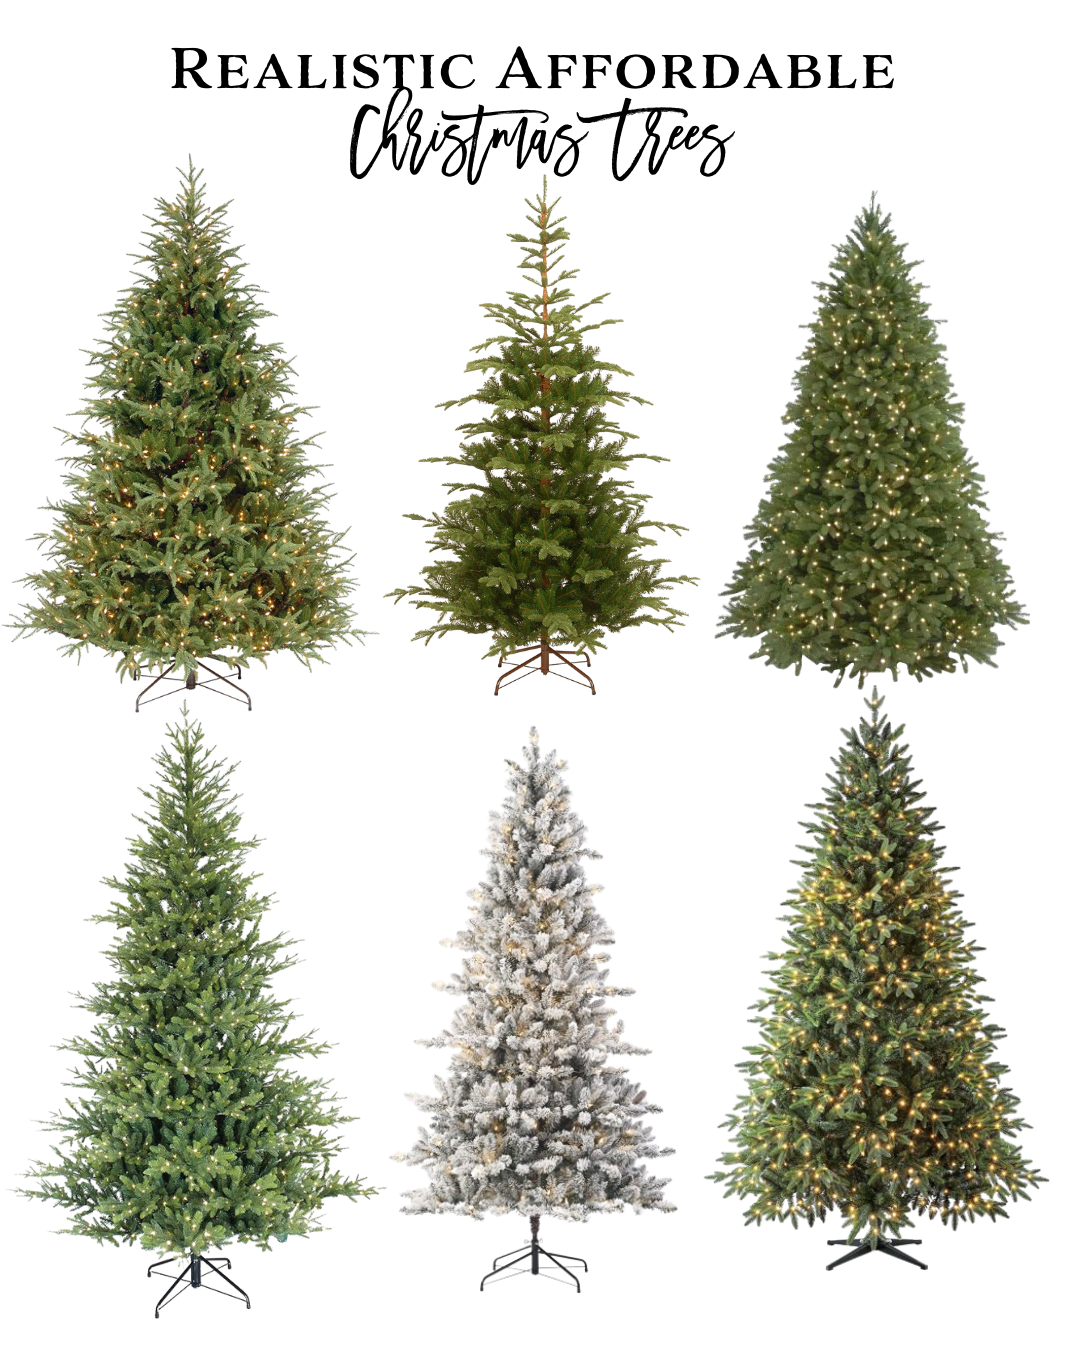 Shop for realistic and affordable Christmas Trees